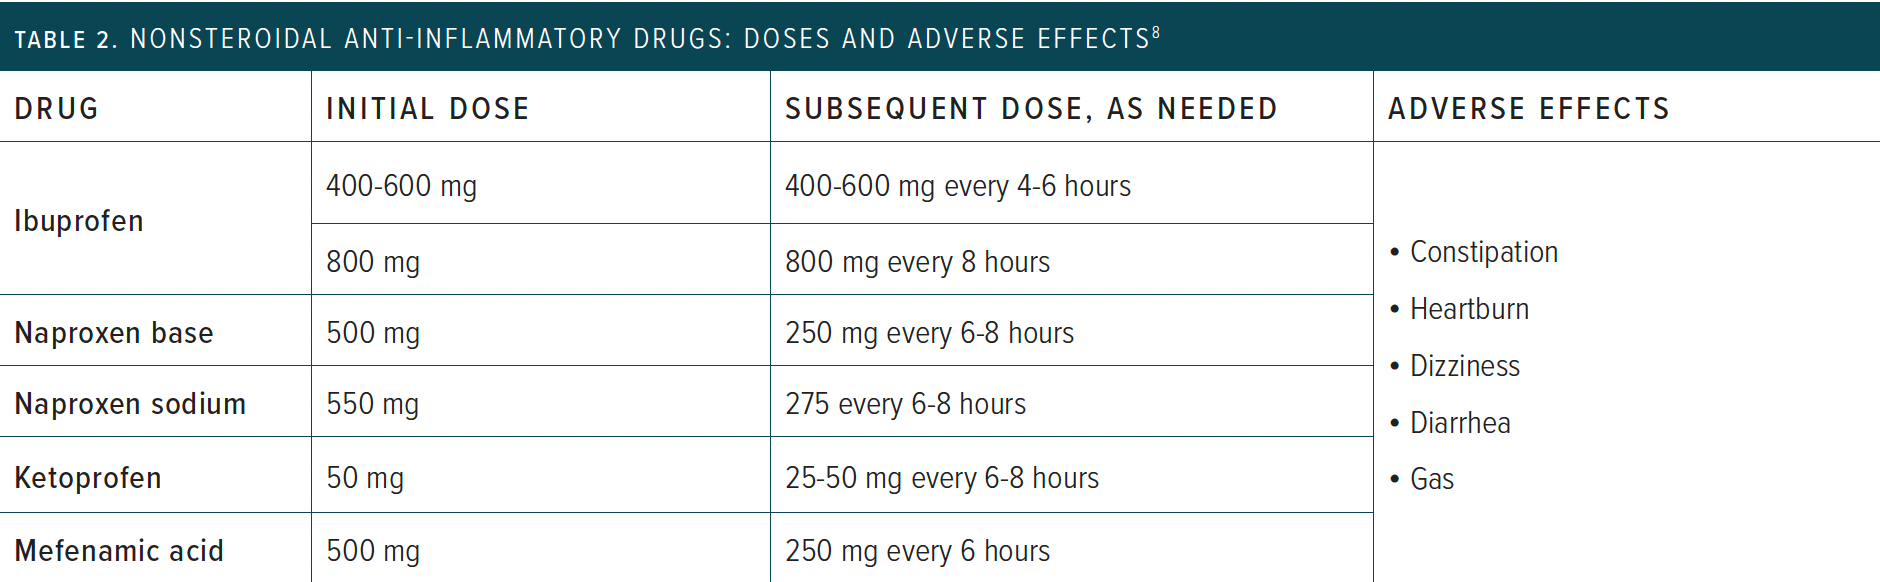 Table 2: Nonsteroidal Anti-Inflammatory Drugs -- Doses and Adverse Effects